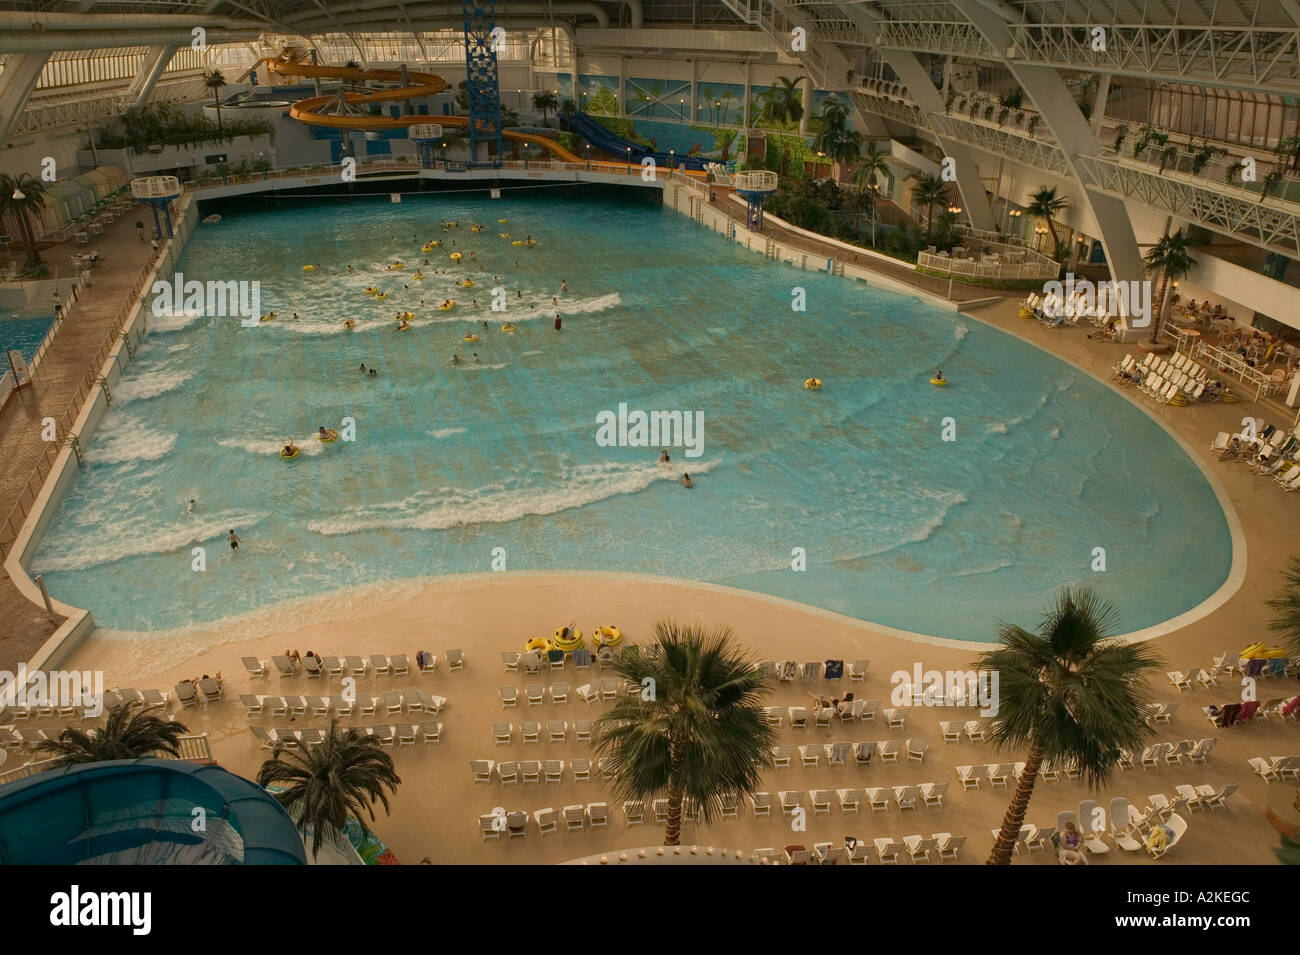 West Edmonton Mall Pool High Resolution Stock Photography And Images Alamy